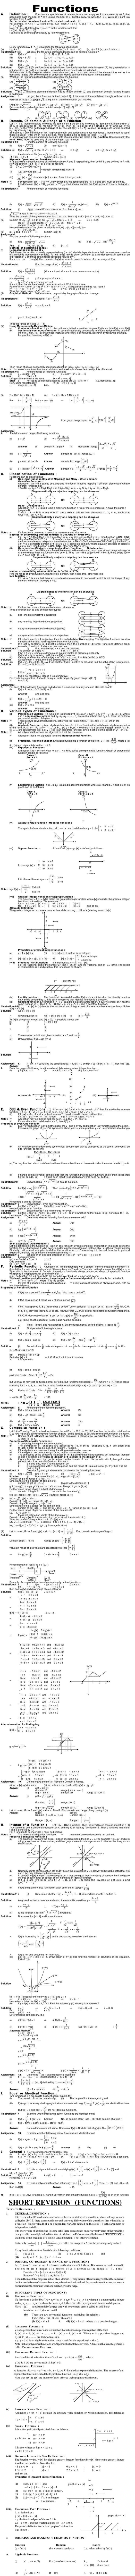 Maths Study Material - Chapter 7